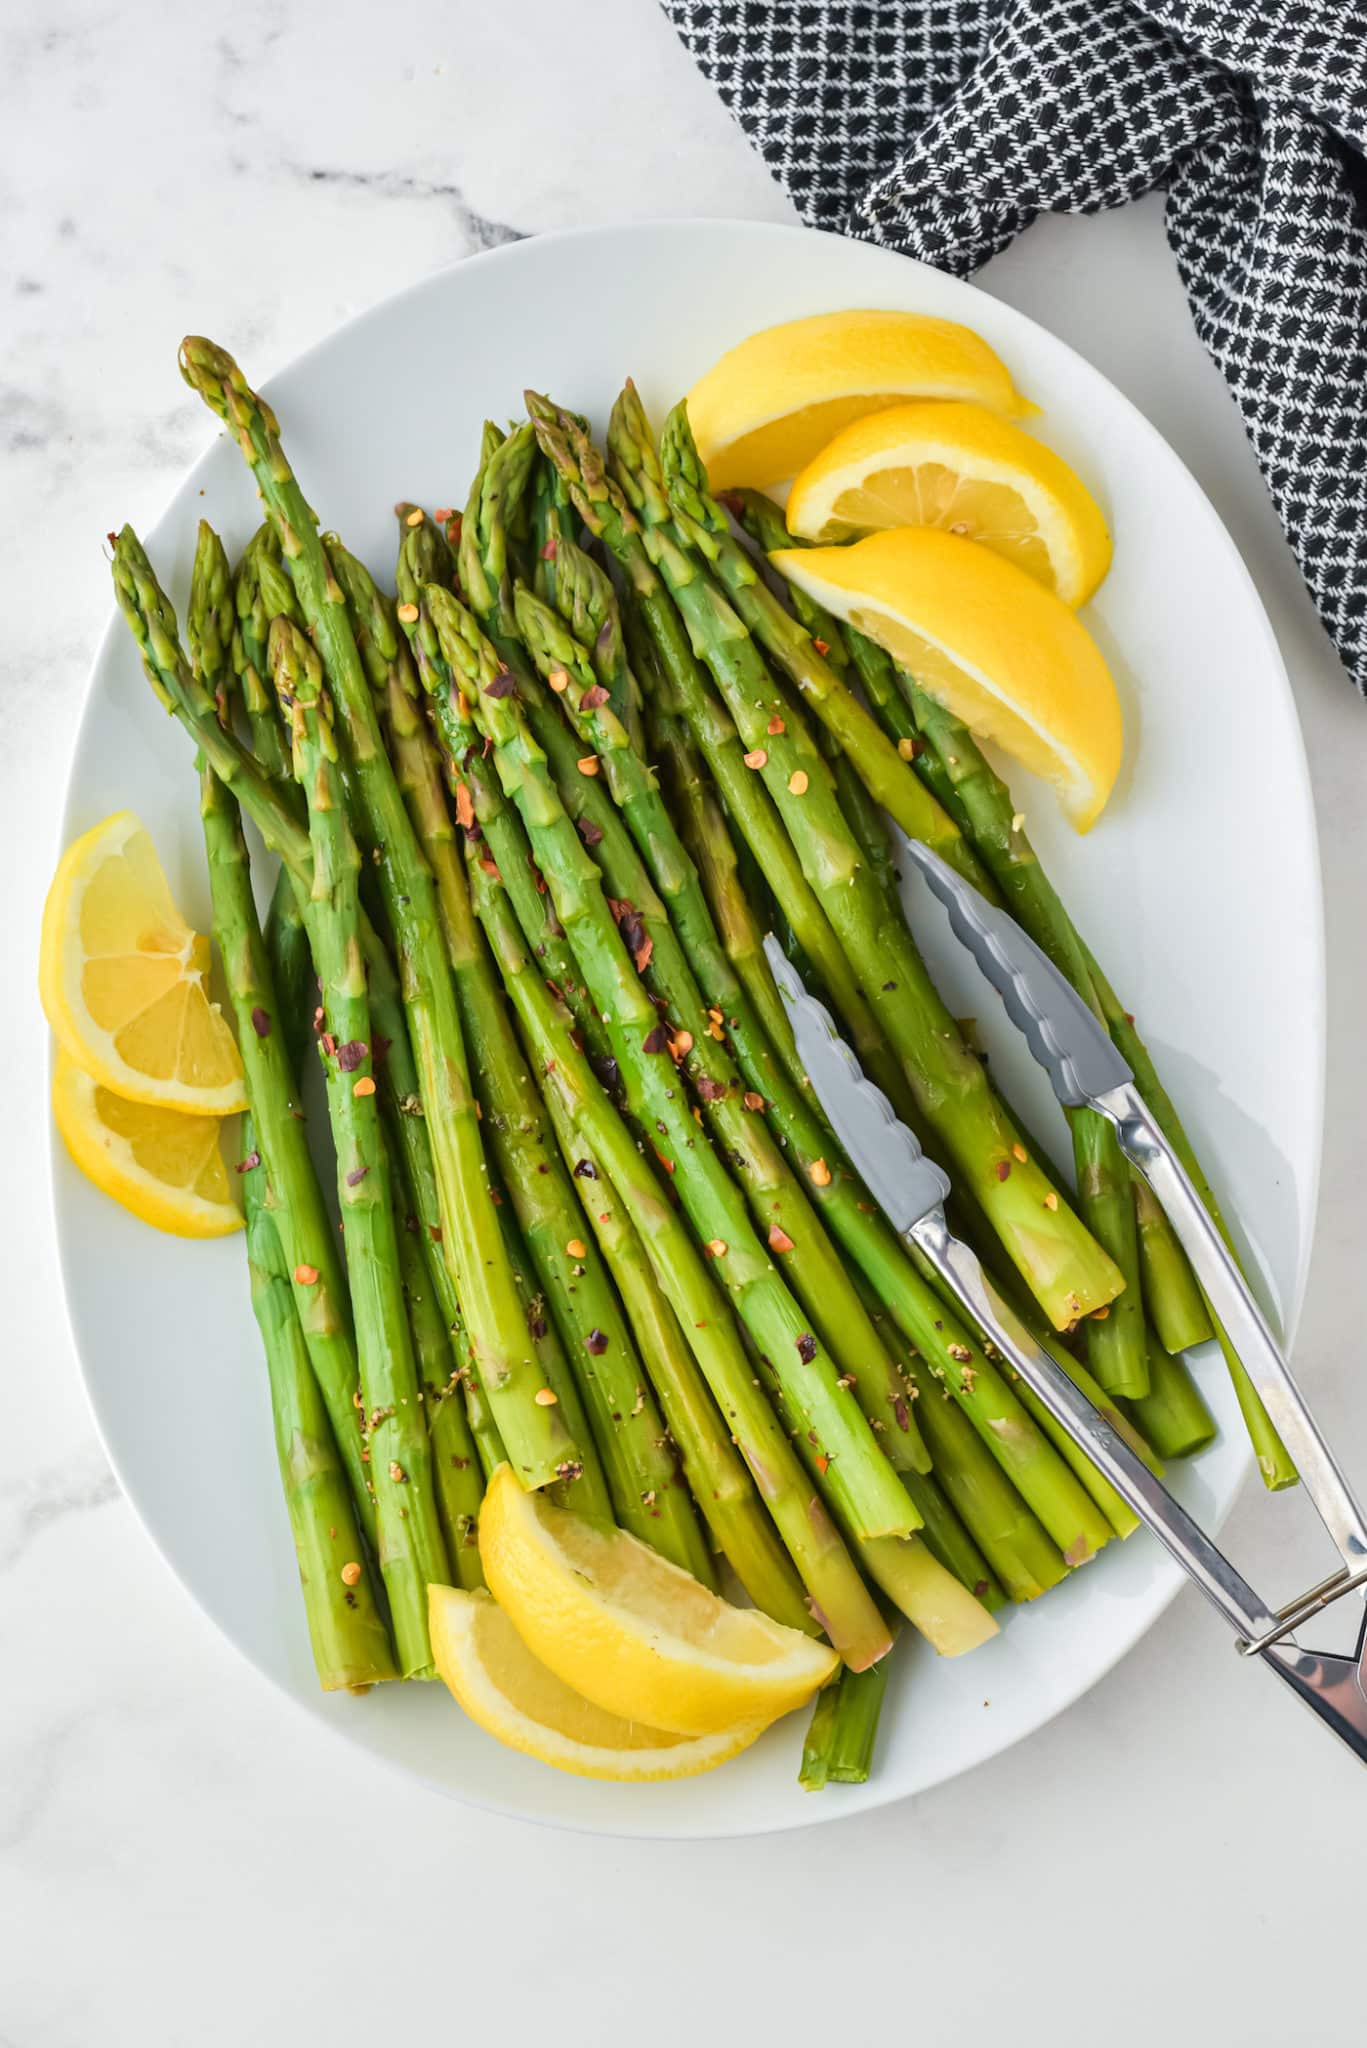 An oval white platter with cooked asparagus, lemon wedges, and tongs.